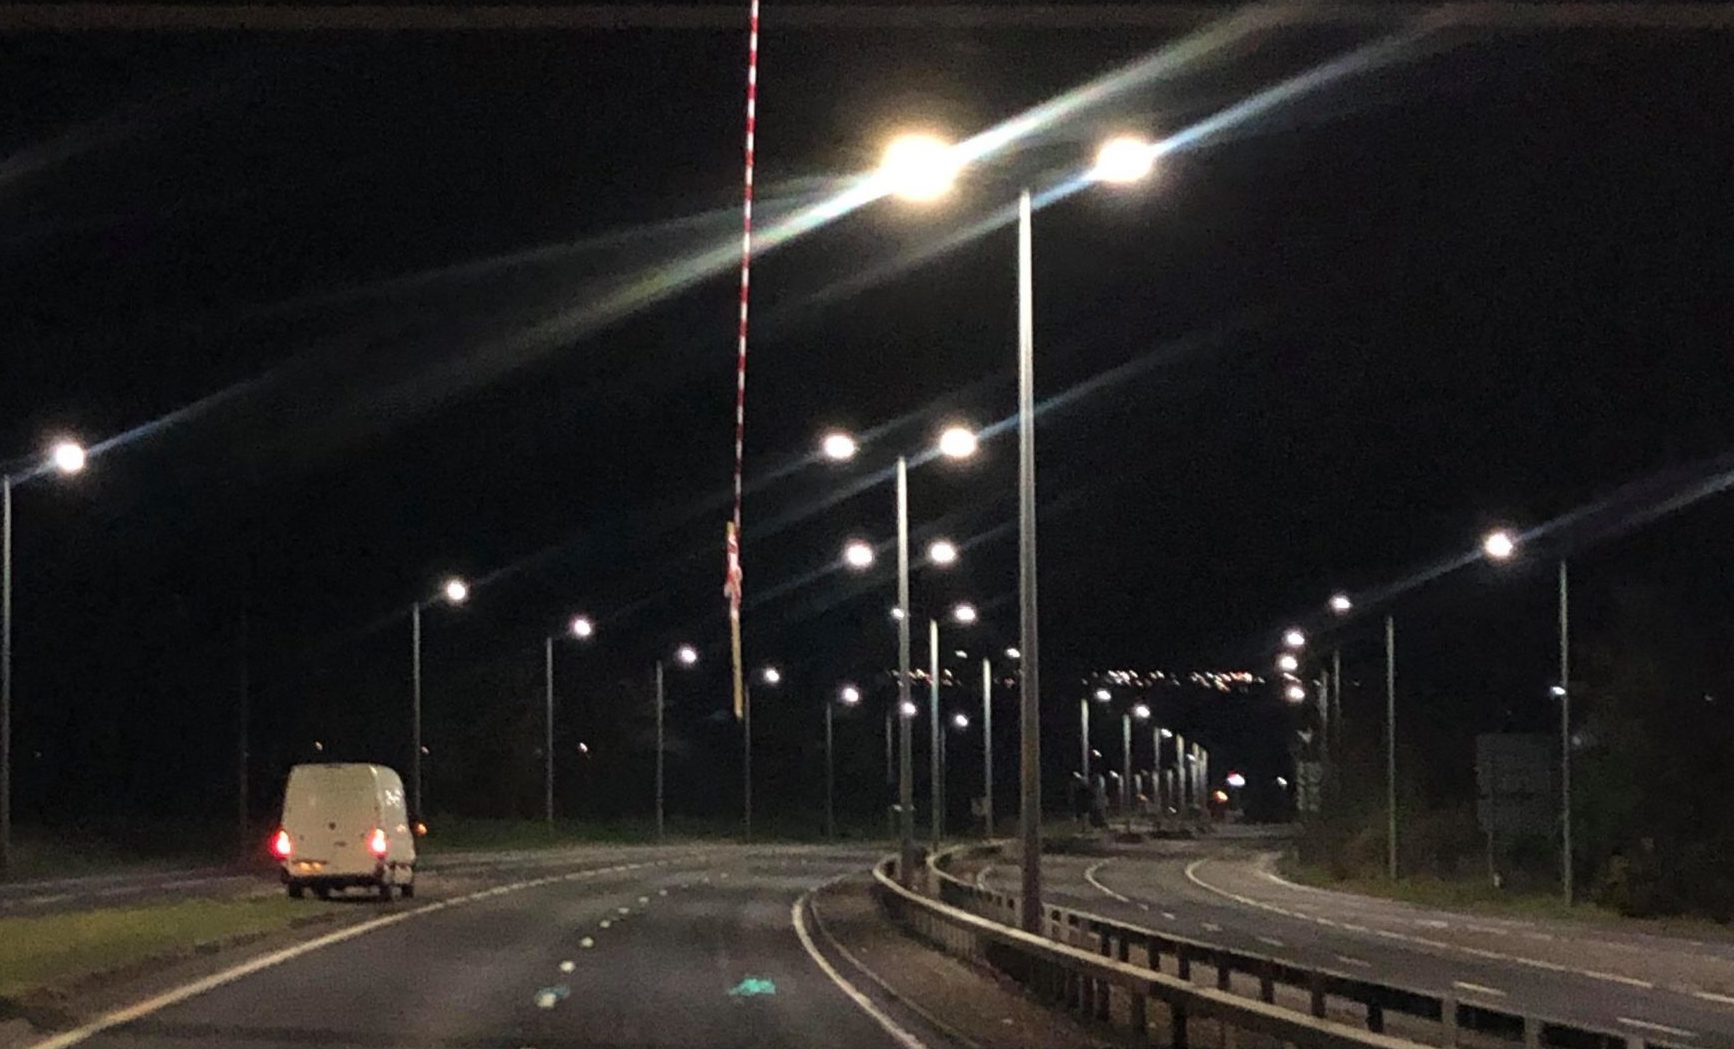 The wooden stake was dangling onto the A9 carriageway from an overhead footbridge at the Raigmore Interchange in Inverness